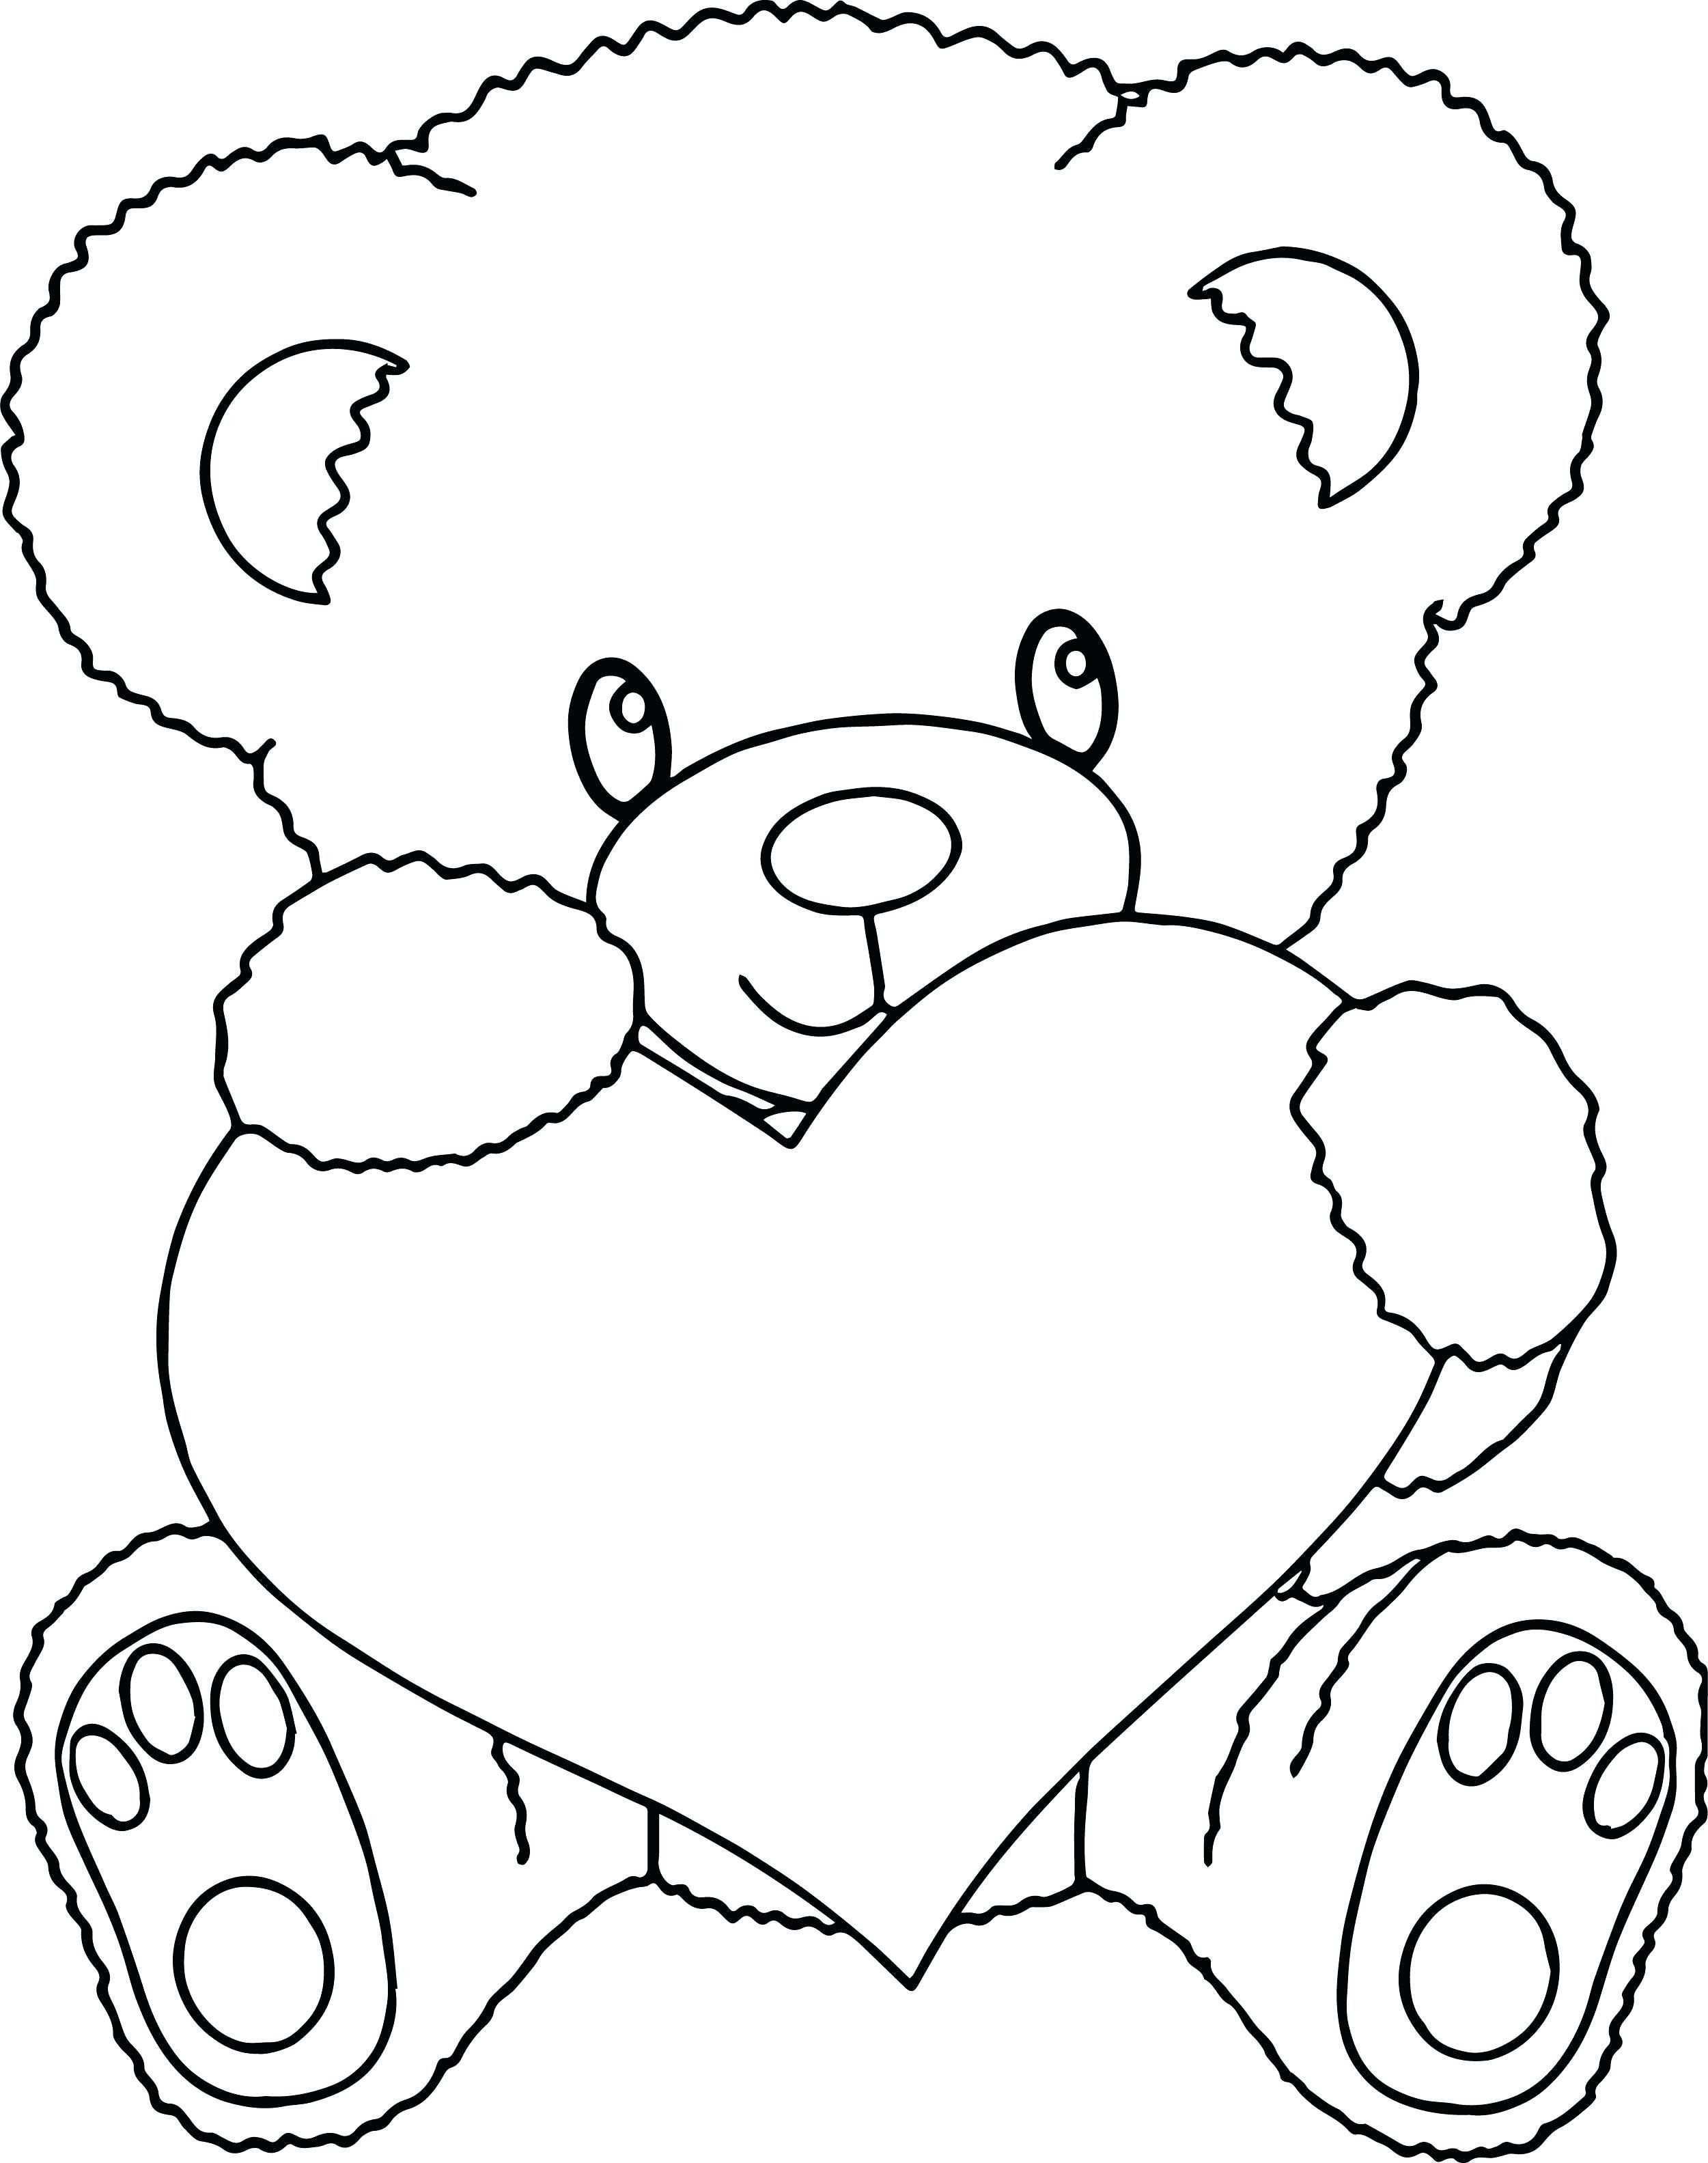 Teddy Bear Coloring Pages Inspirational Good Luck Care Bear Coloring Pages Nemesiscol